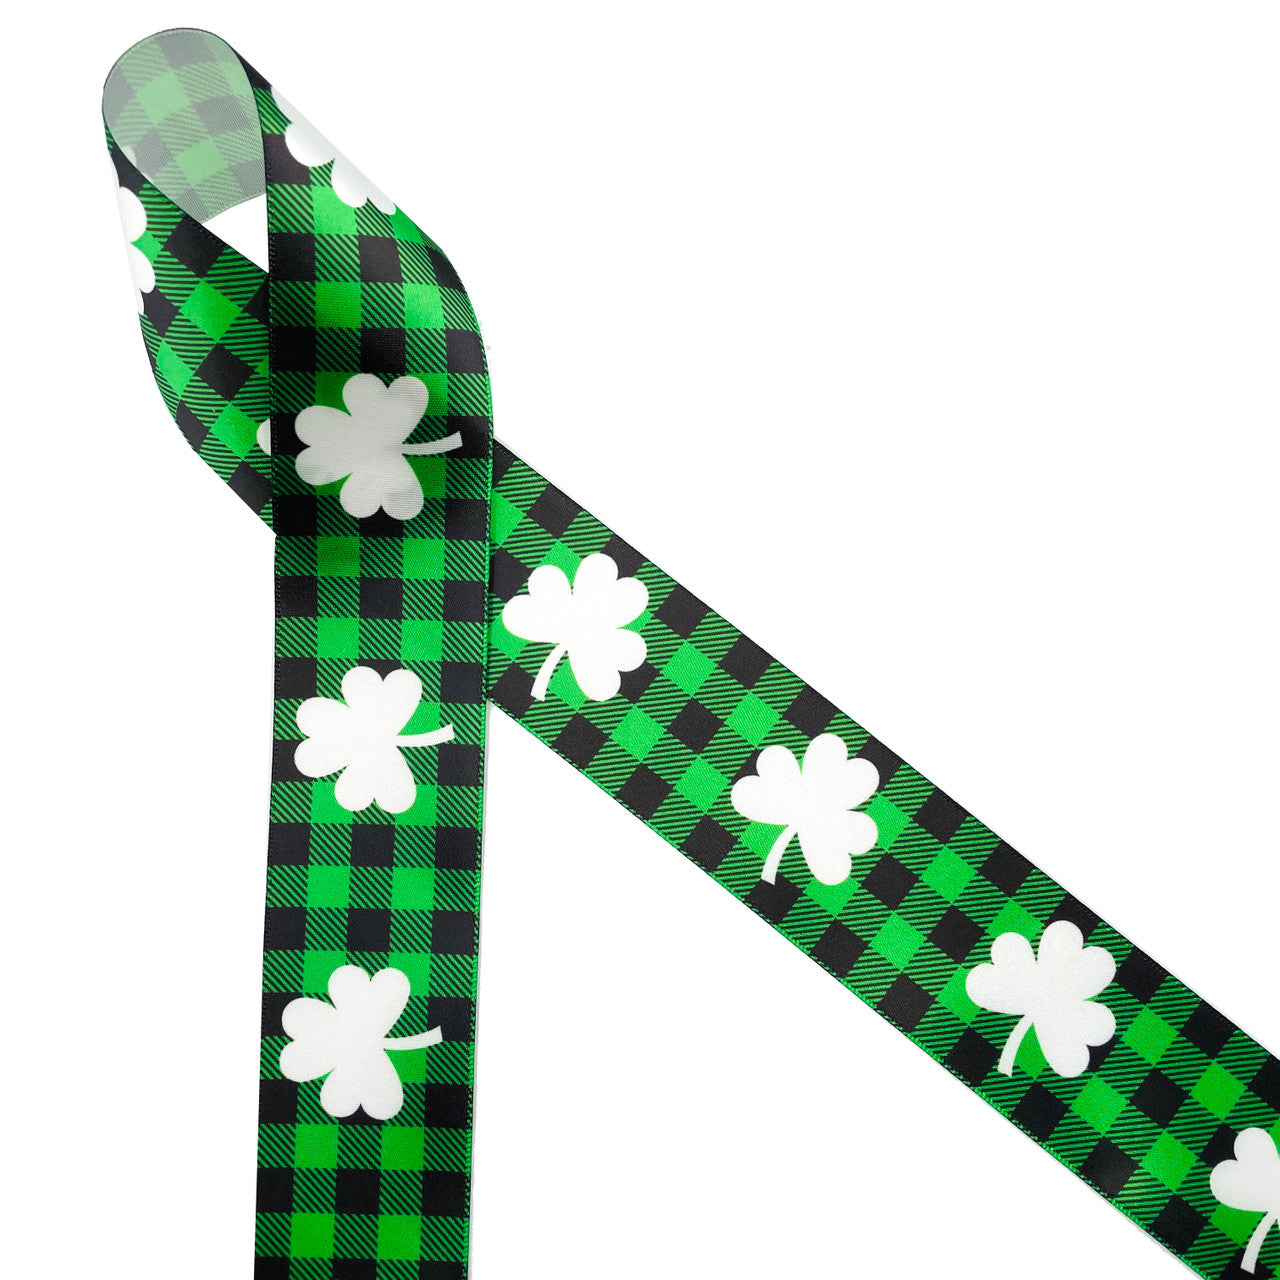 St Patrick's Day Ribbon white clover on green and black buffalo plaid background printed on 1.5" white grosgrain  and satin